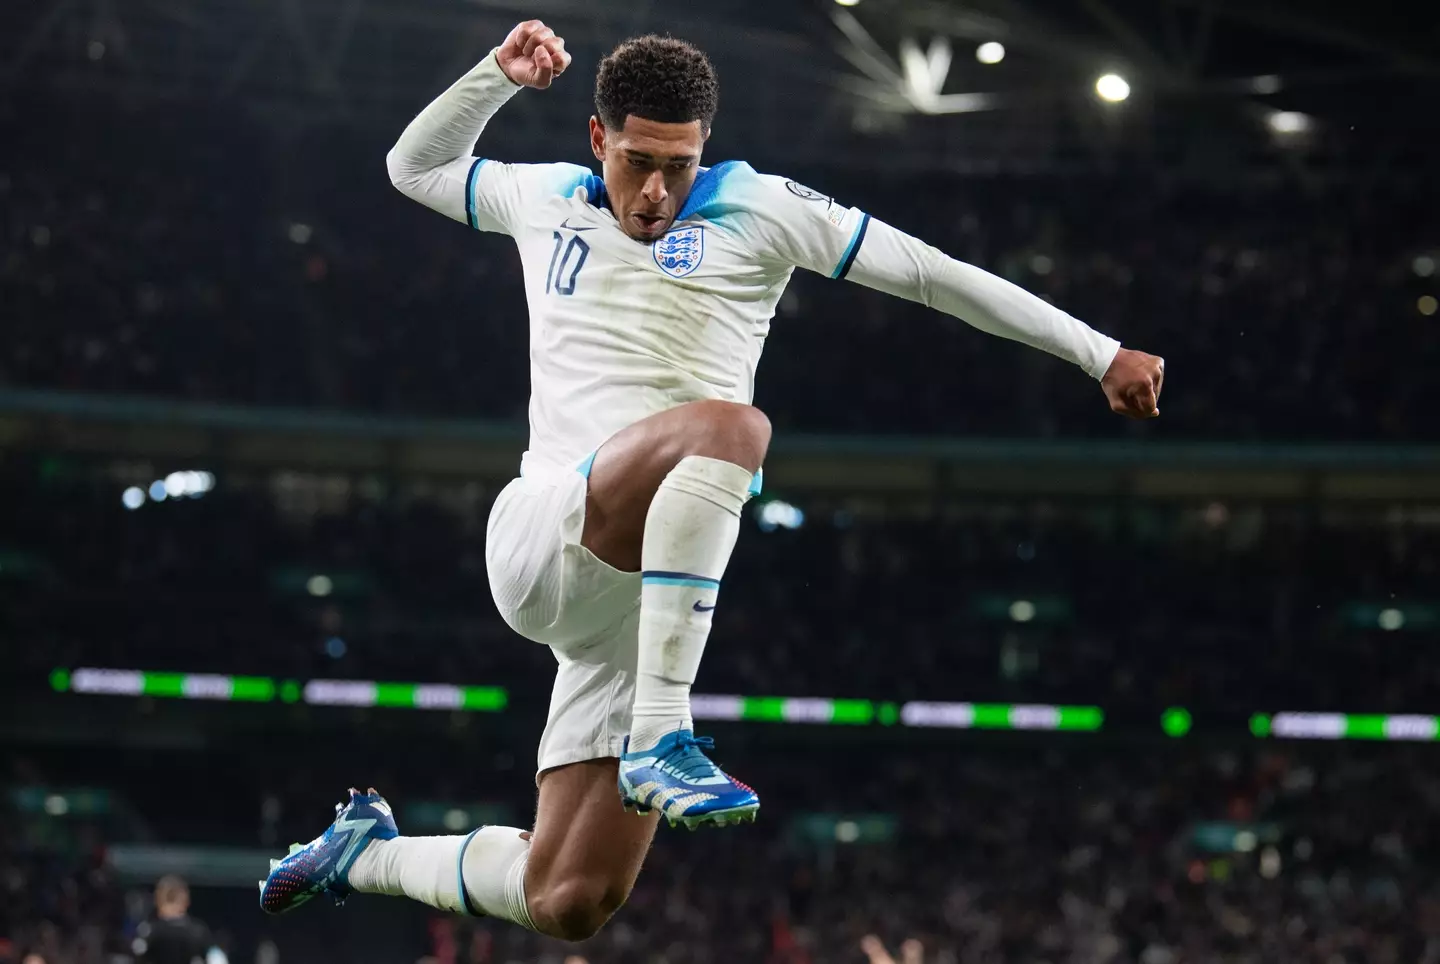 The 20-year-old has been hailed as a 'future' England captain.